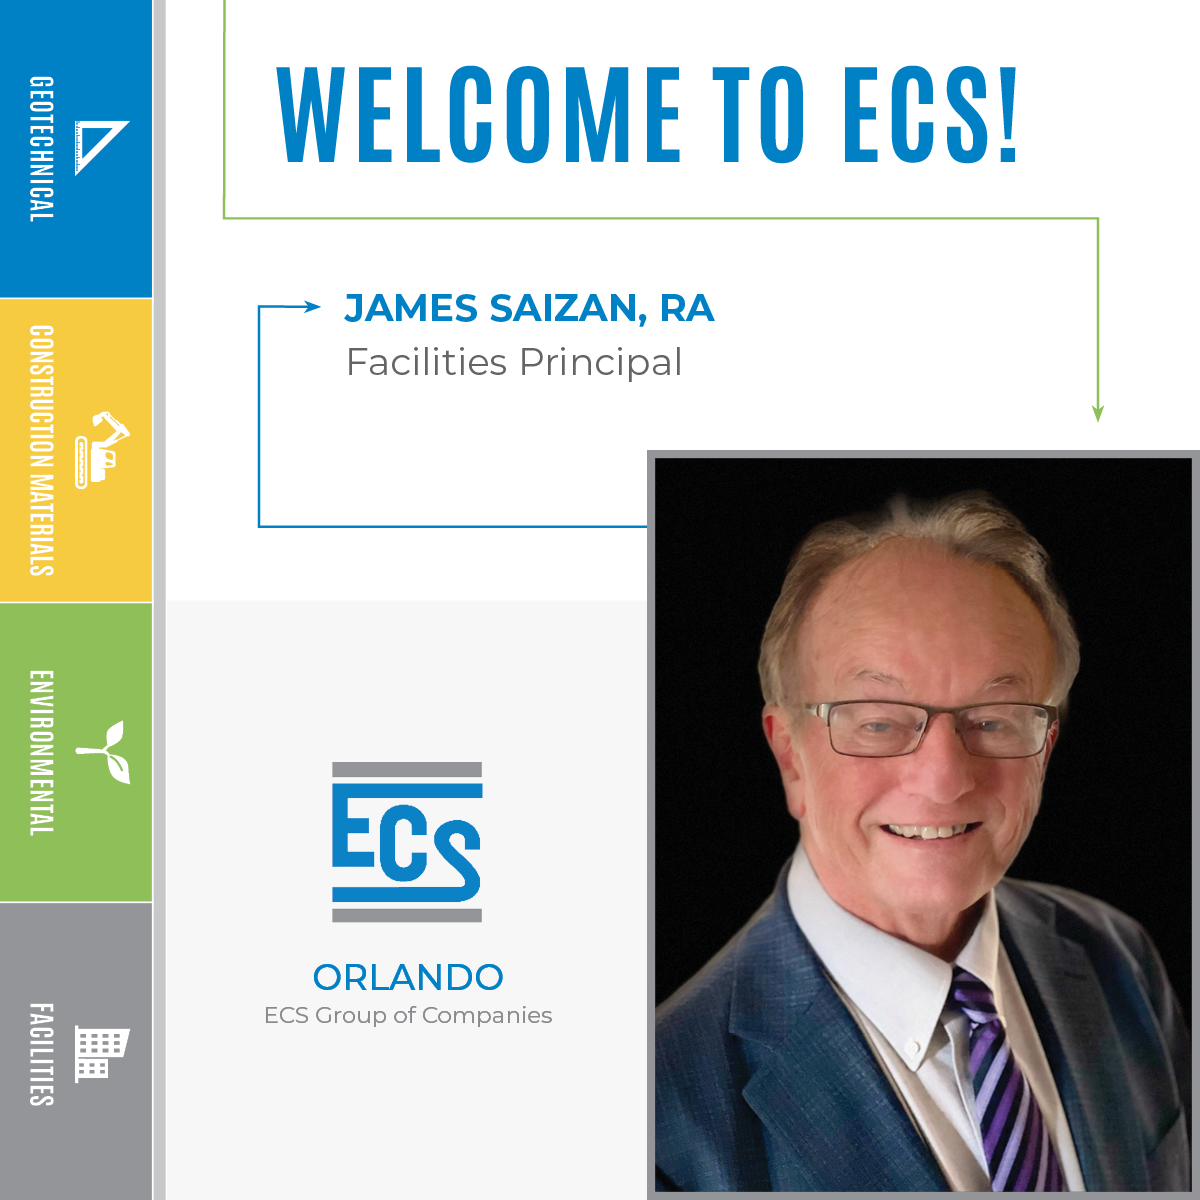 Square graphic with a headshot of James Saizan in the lower right corner and ECS logo with James' new title.